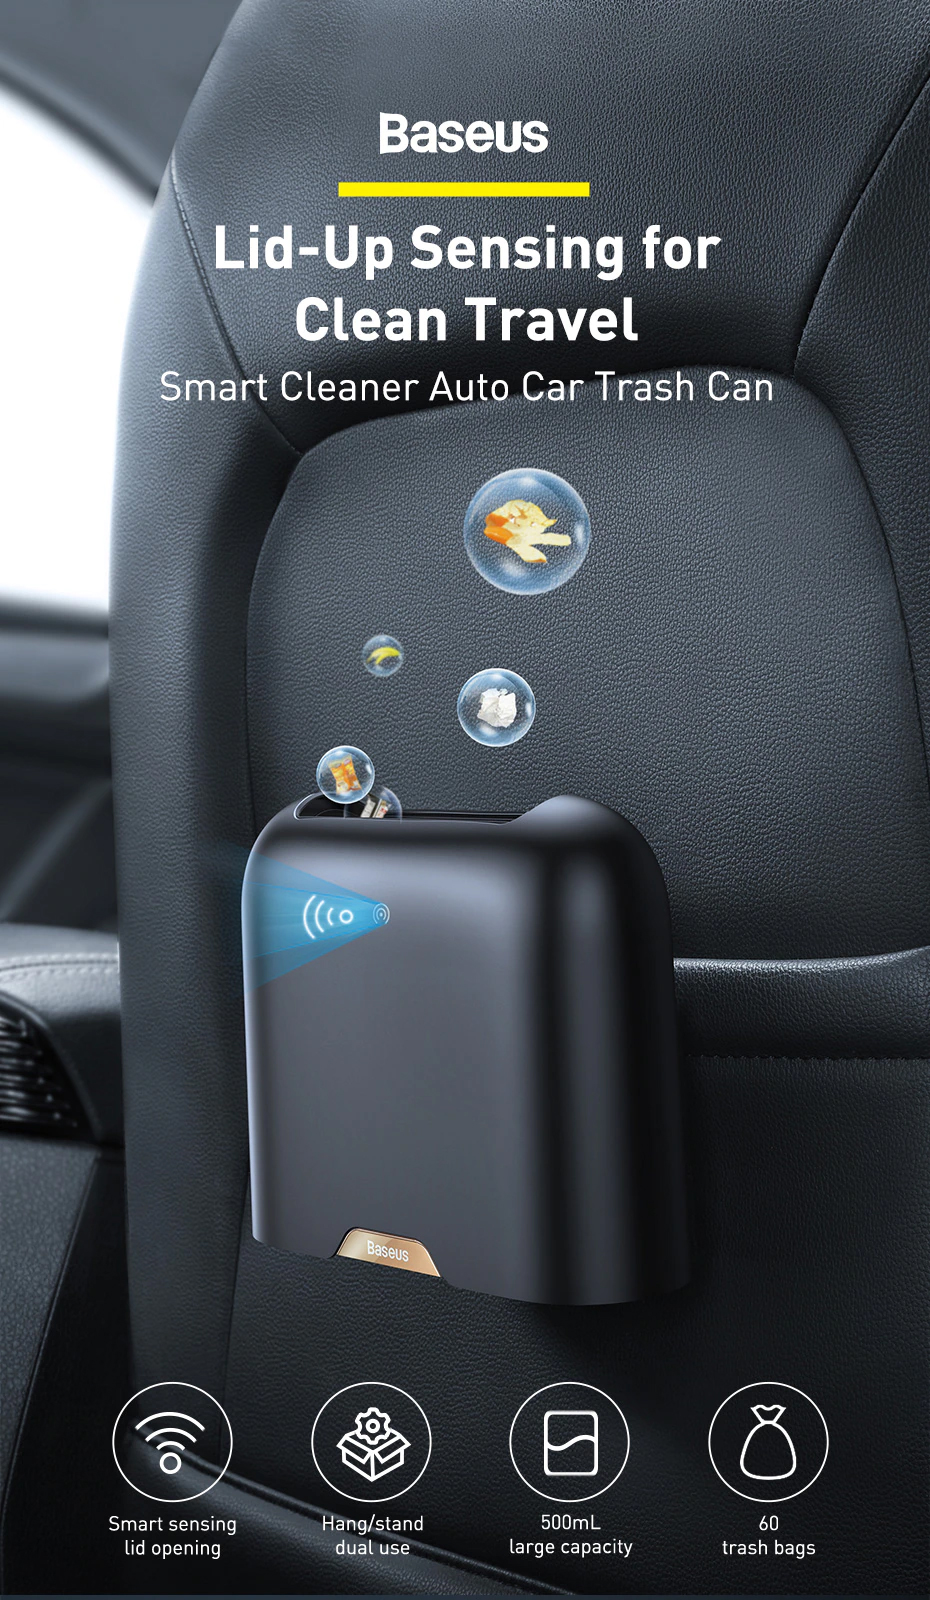 Baseus Smart Cleaner Auto Car Trash Can Lid-Up Sensing for Clean Travel